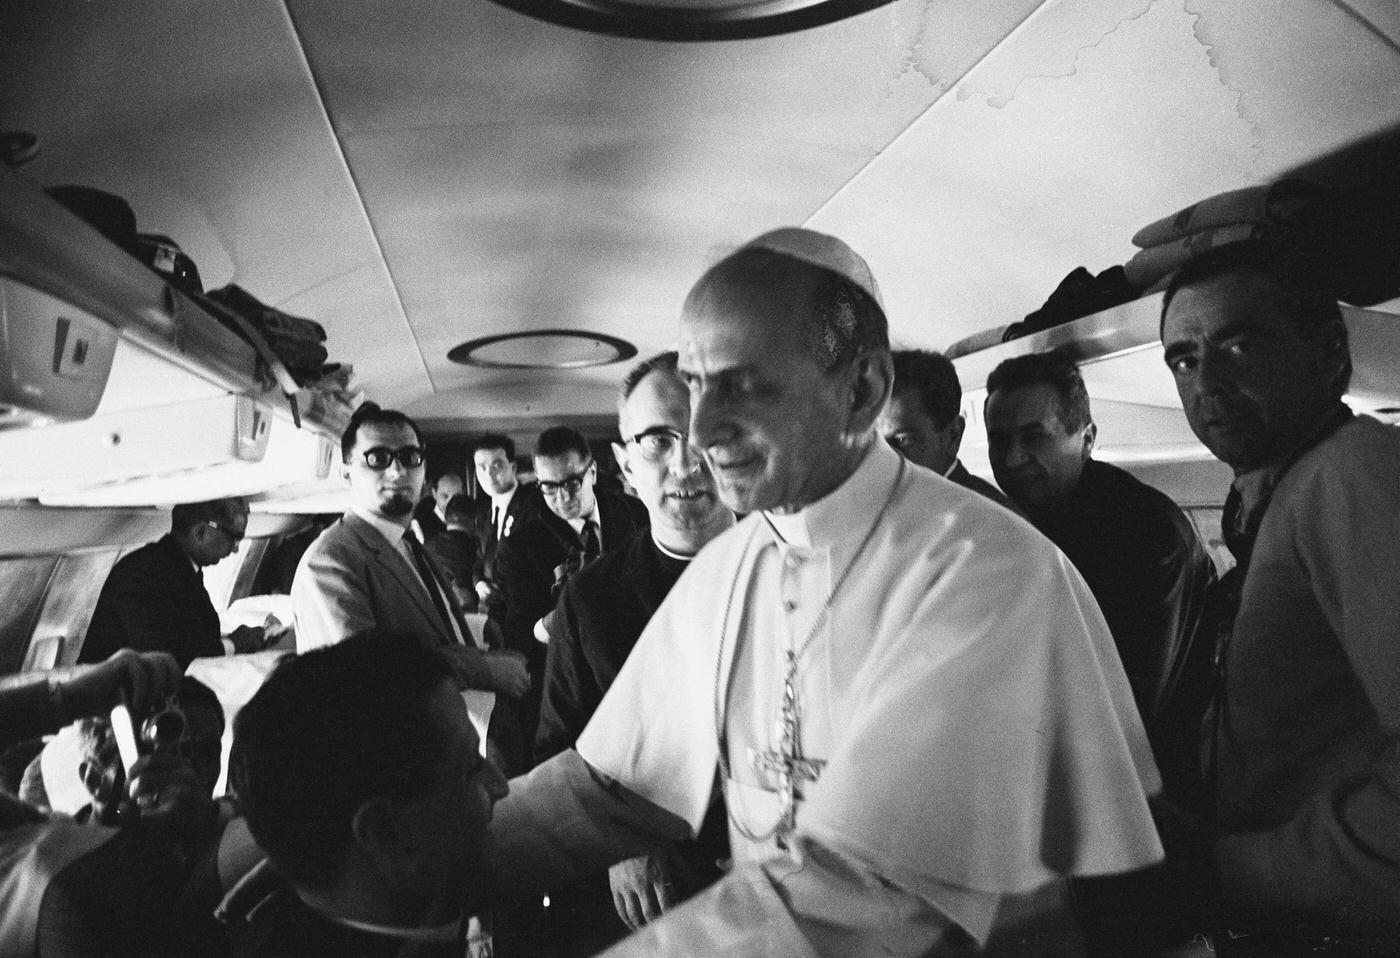 Pope Paul VI blessing fellow travellers on a flight to India on December 4, 1964.